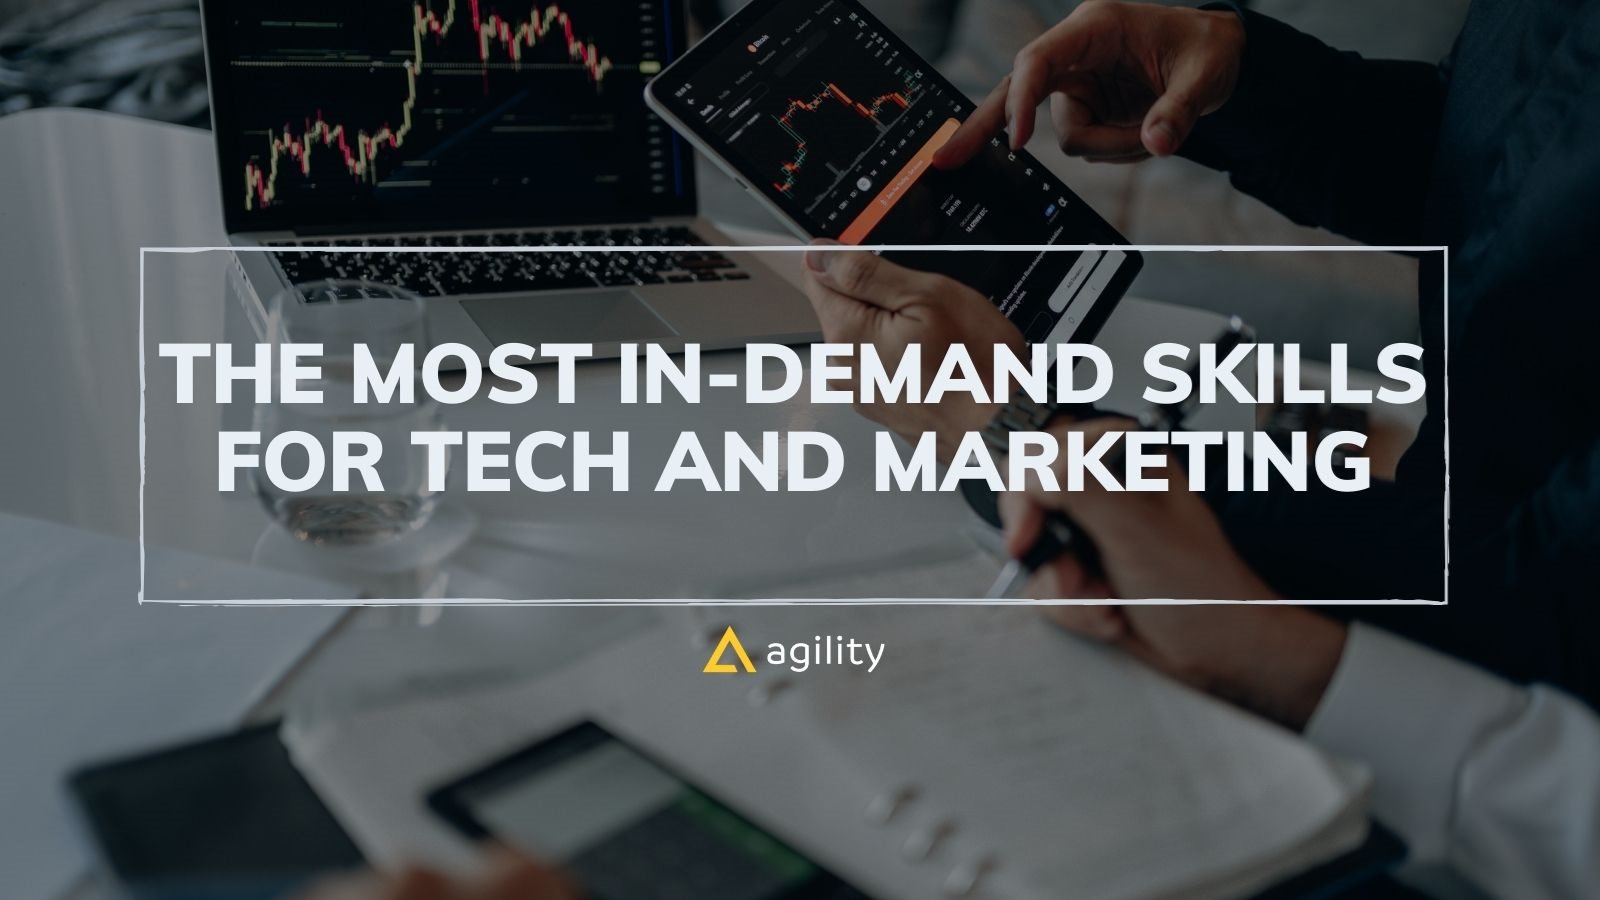 The Most in-demand Skills for Tech and Marketing